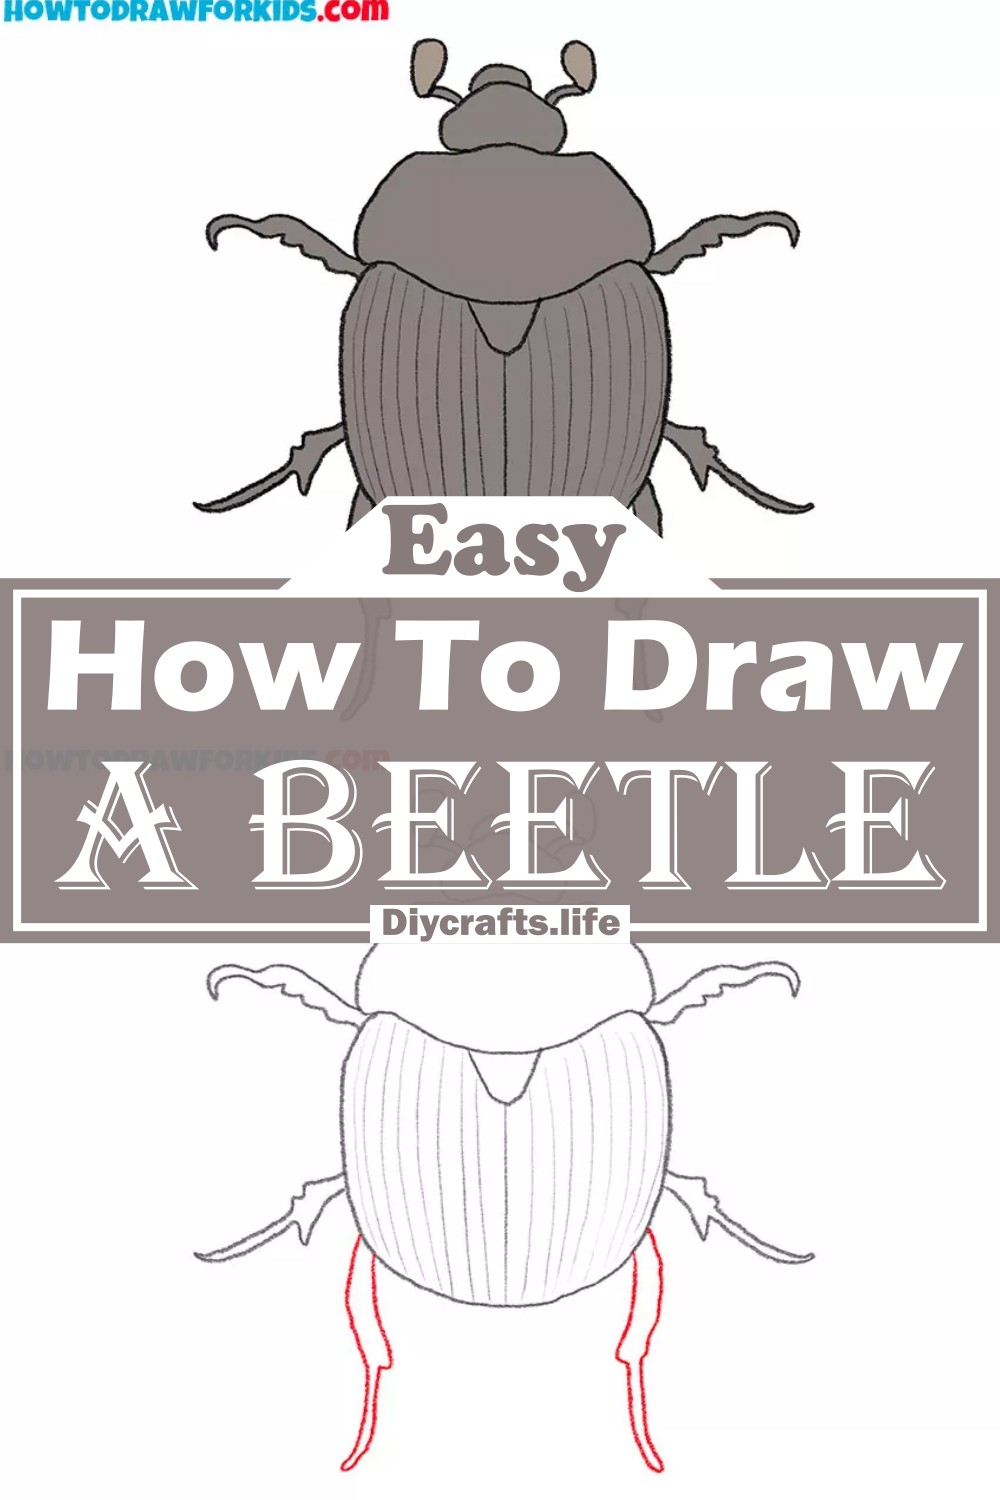 How To Draw A Beetle